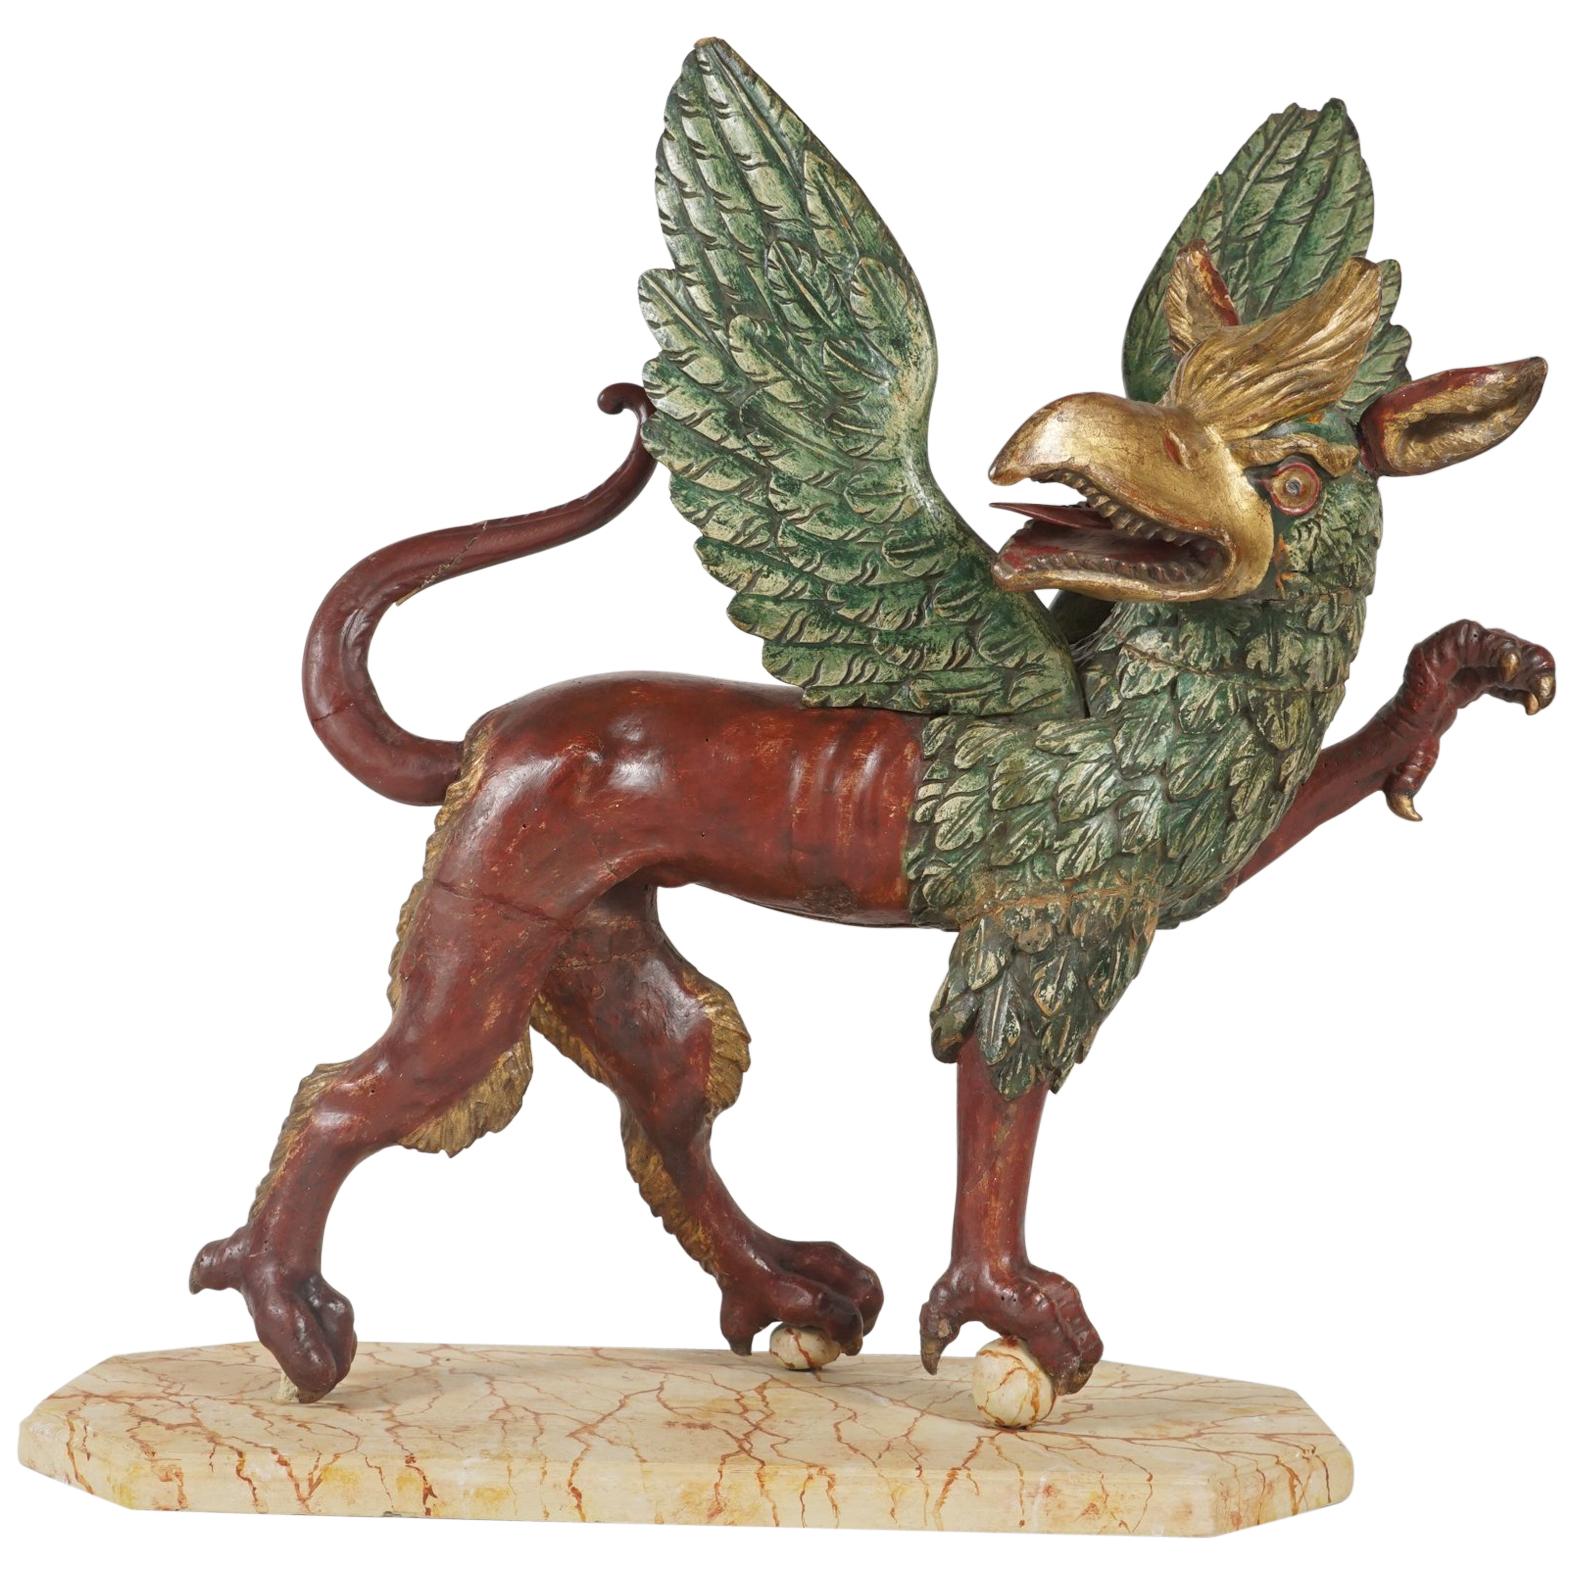 Italian Baroque Style Carved, Painted and Gilded Wood Figure of a Griffon